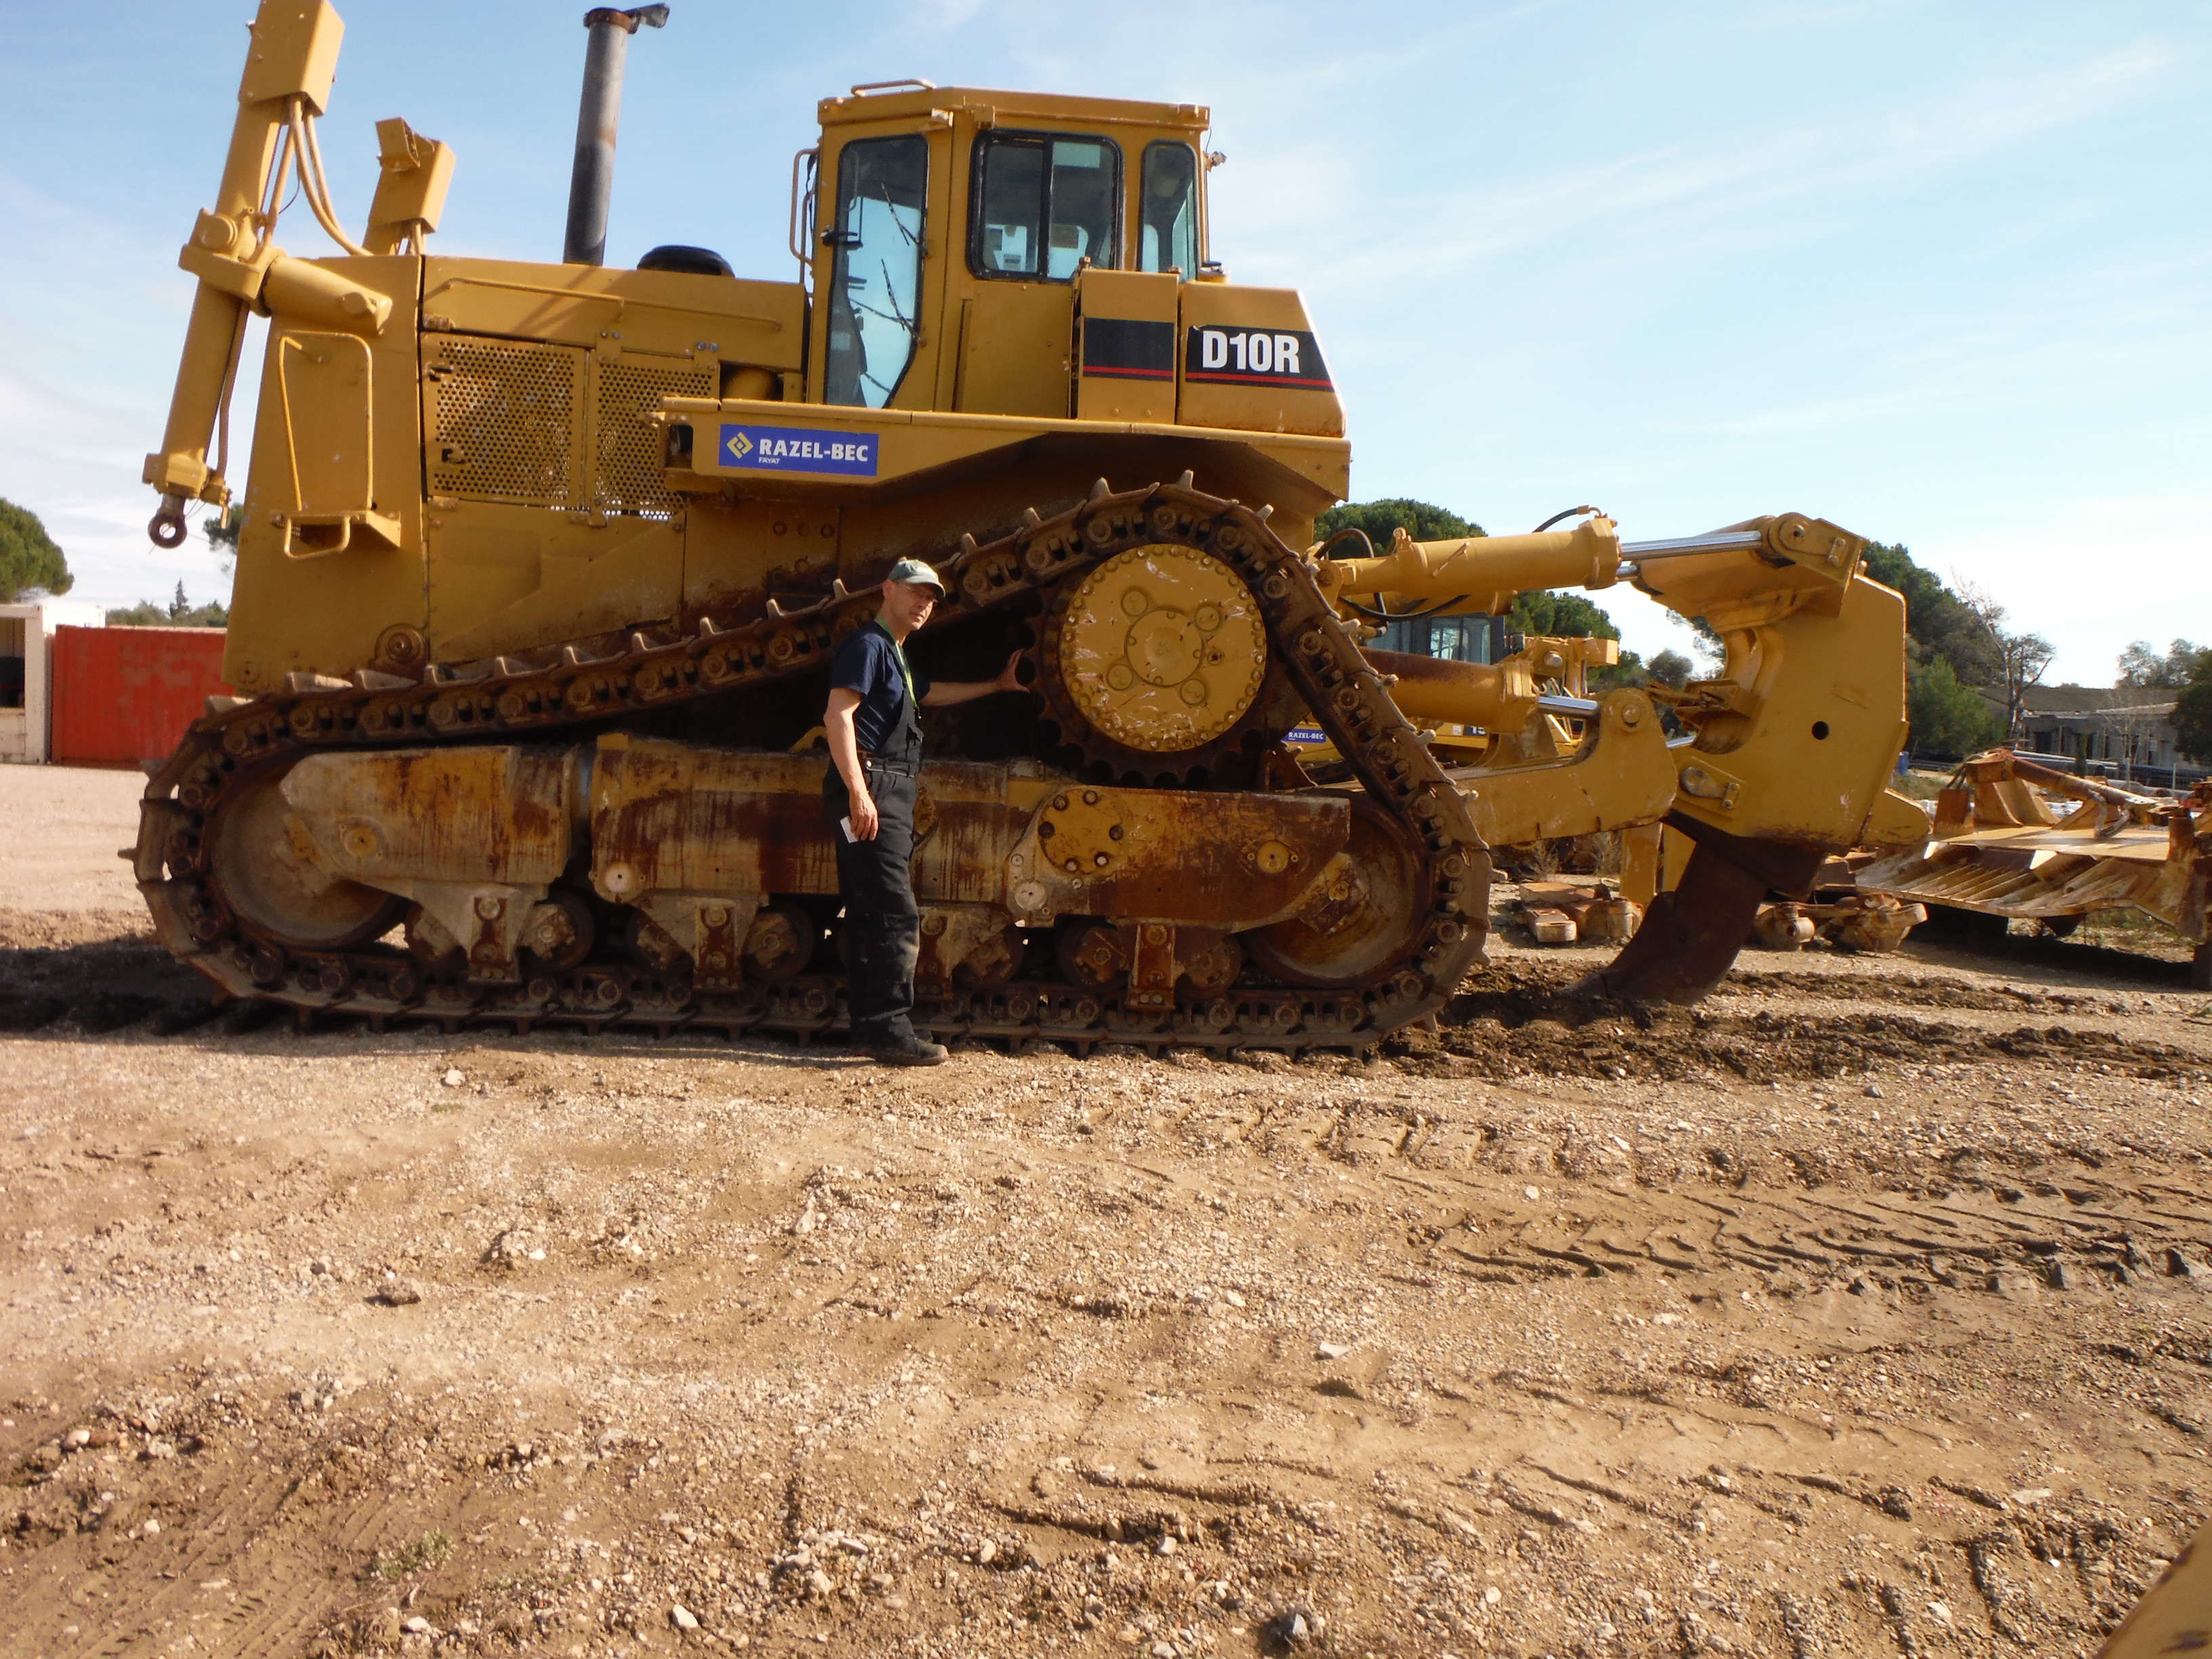 Expertise for a CAT D10R